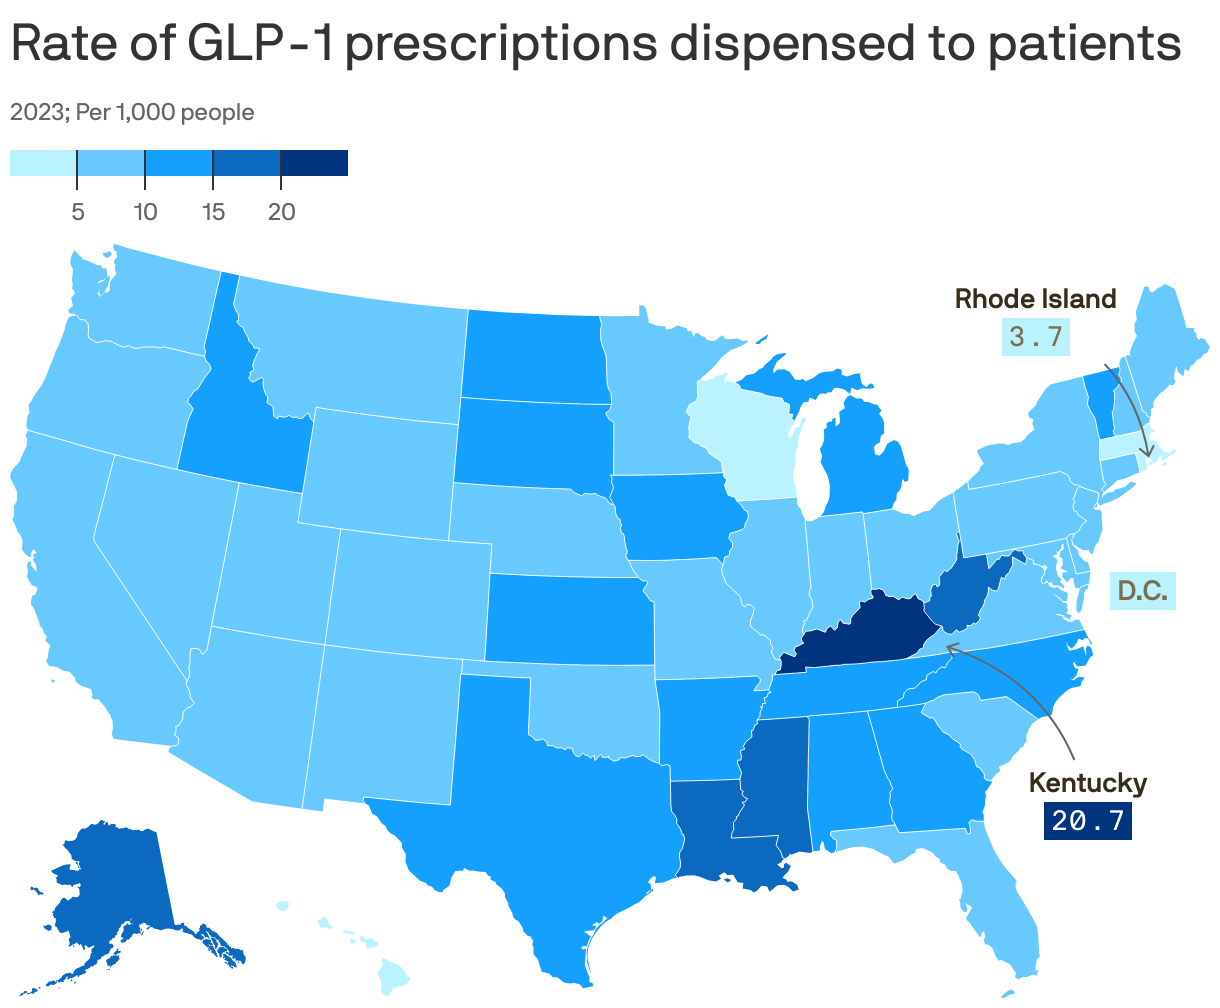 Rate of GLP-1 prescriptions dispensed to patients